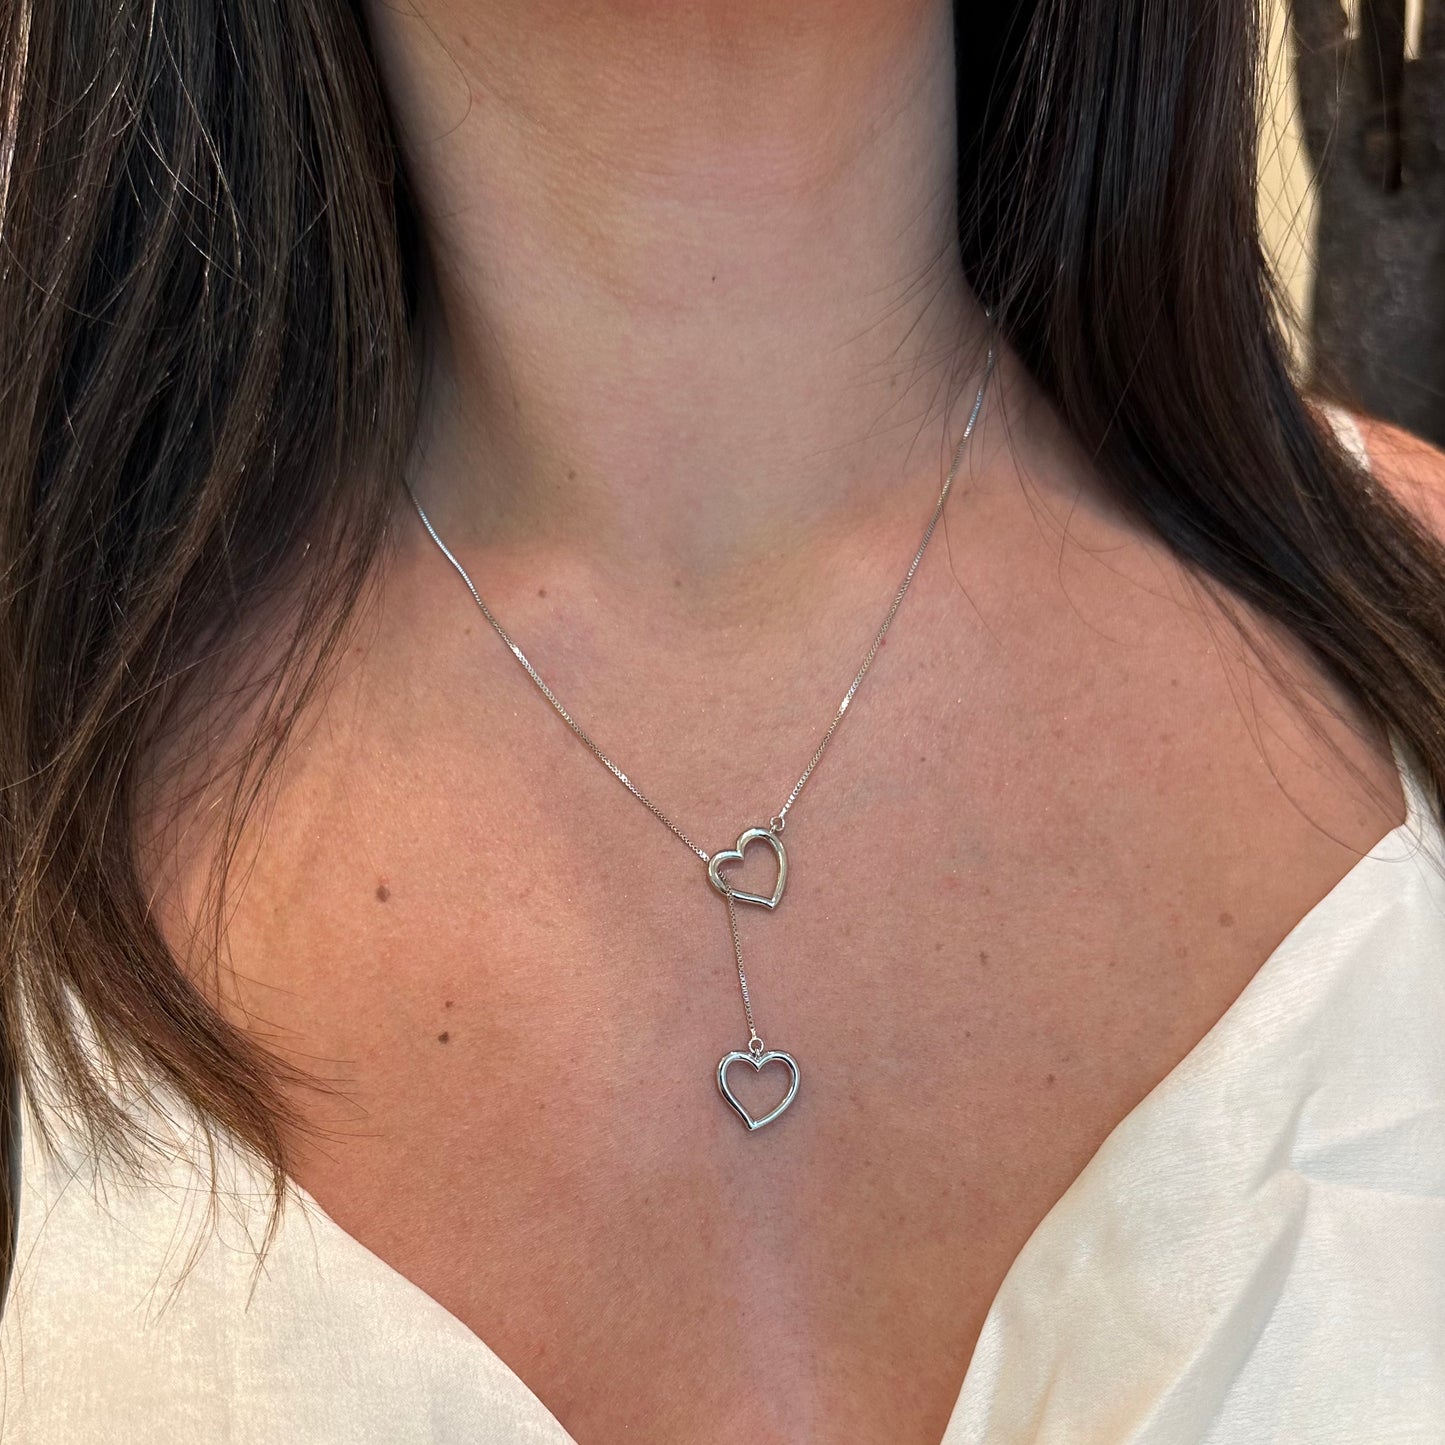 LOVELY HEART NECKLACE | Double White Rhodium Plated